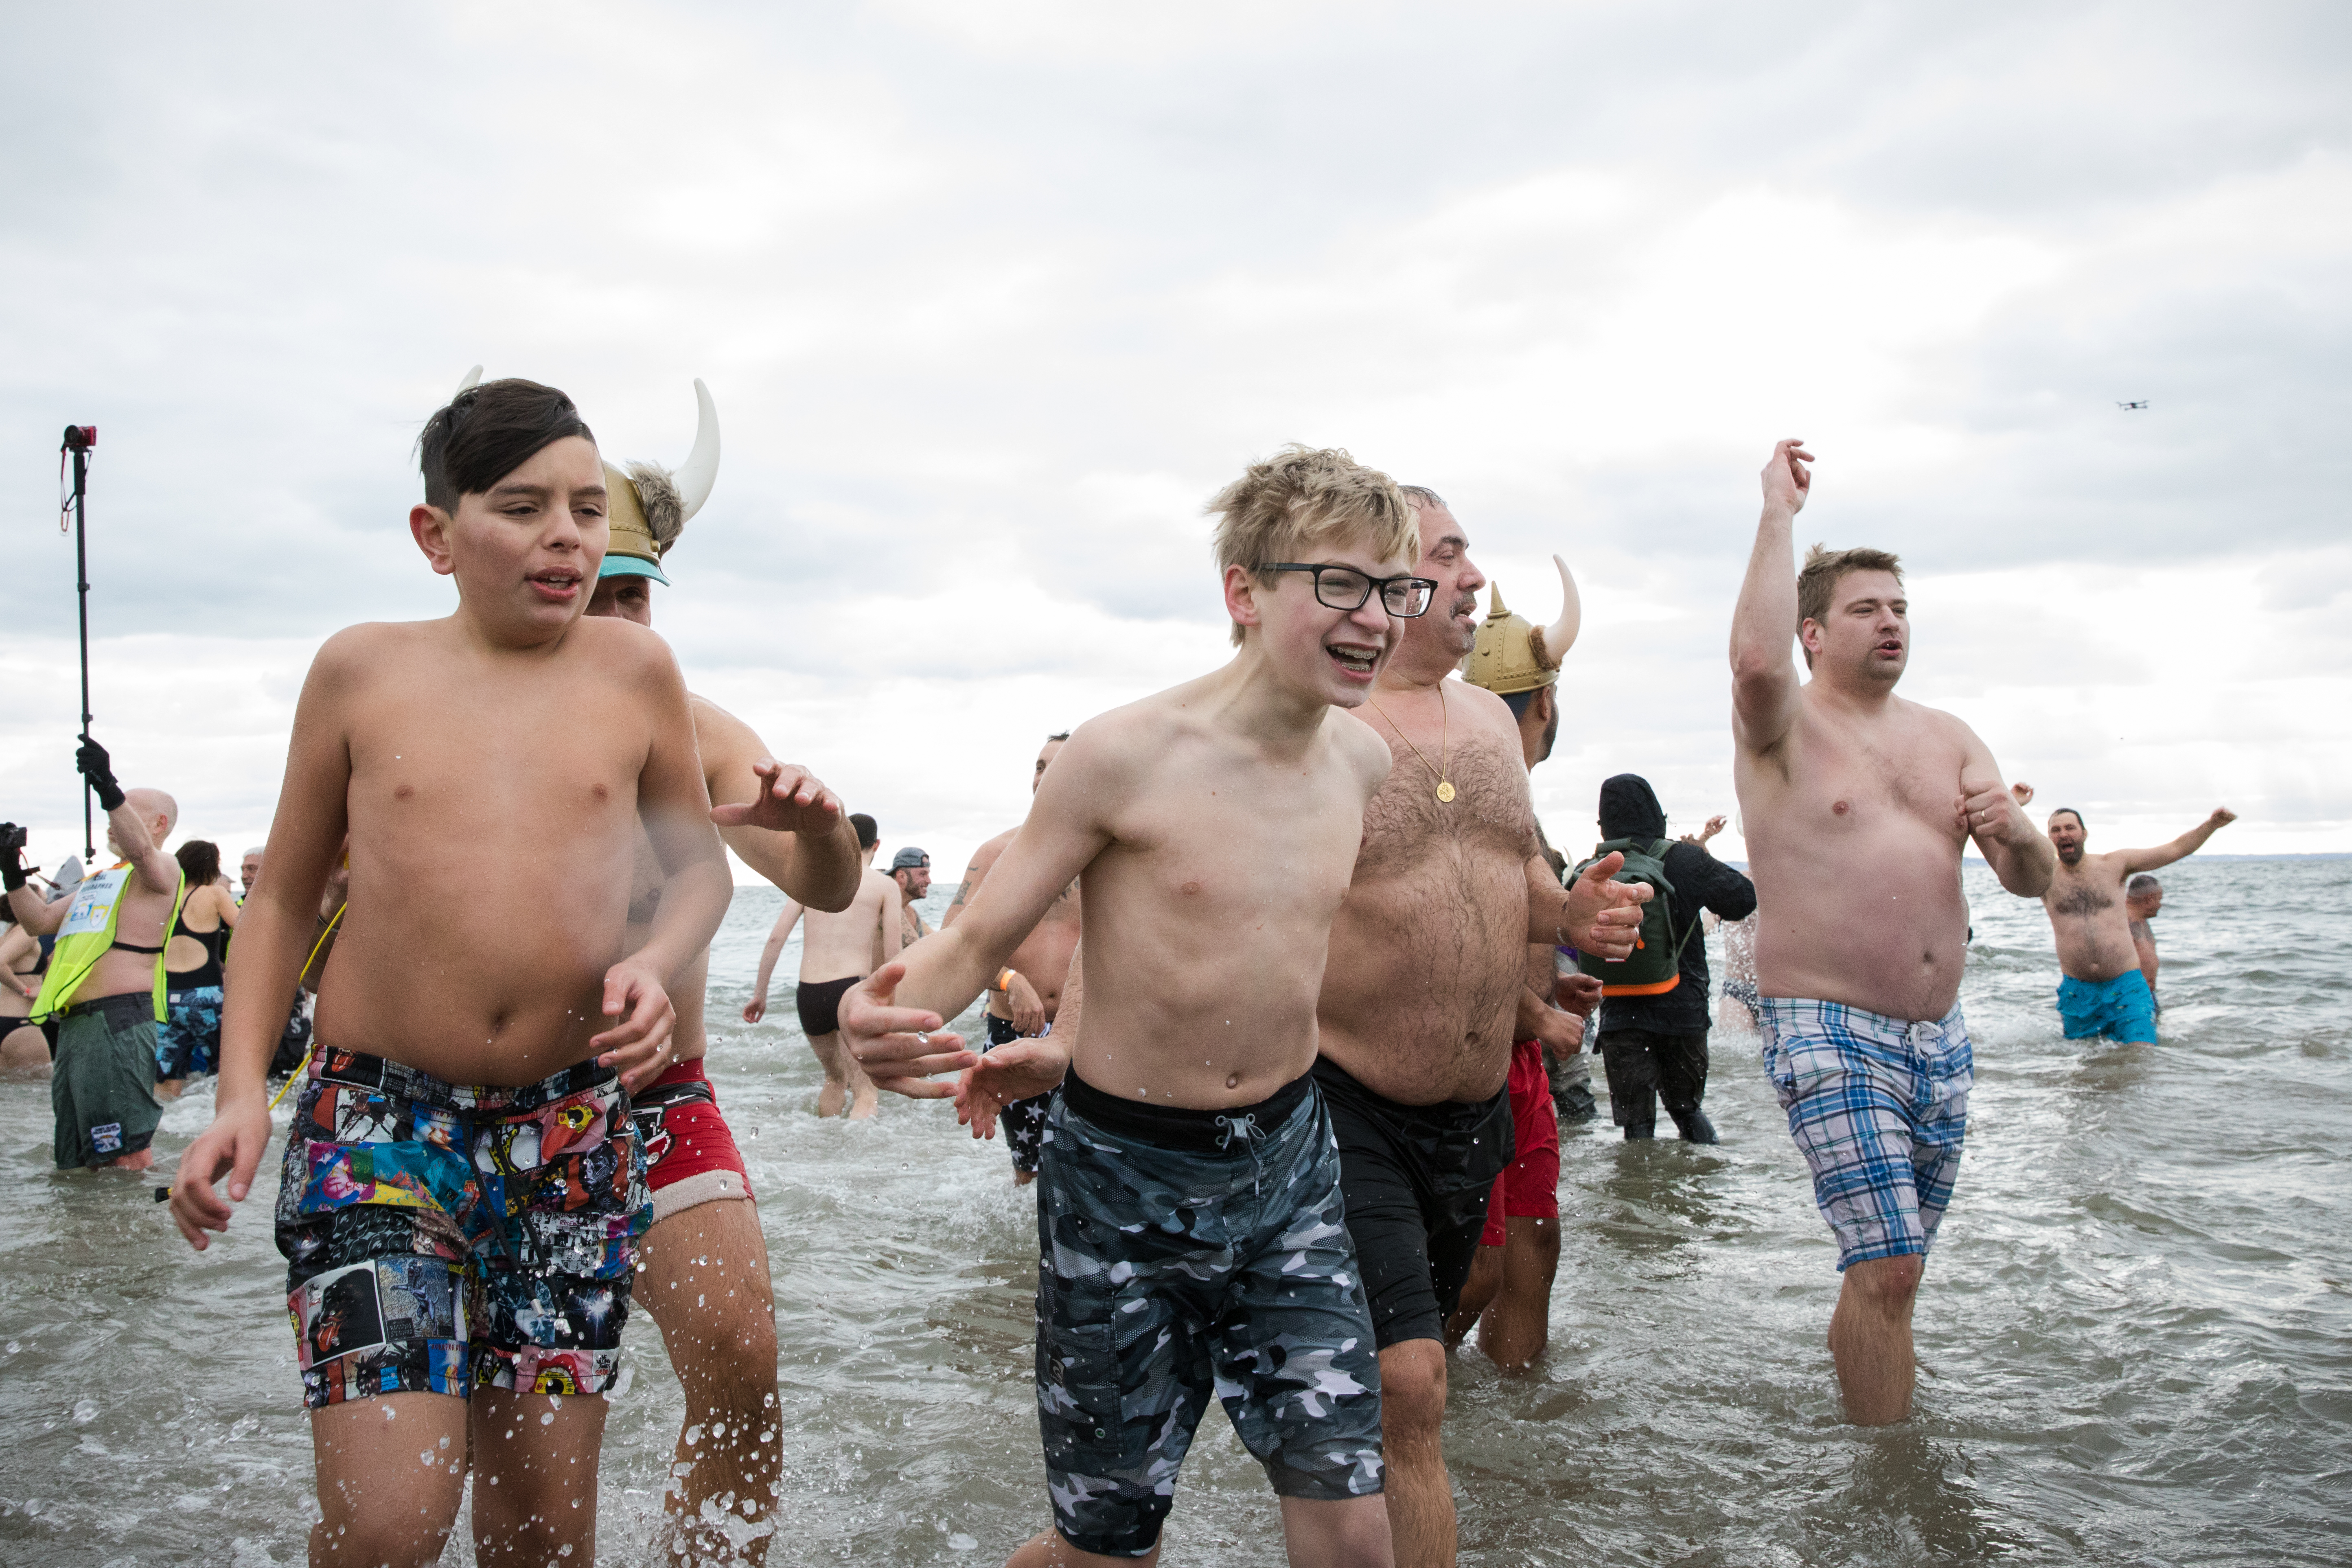 Swimmers of all ages plunged into the frigid water.